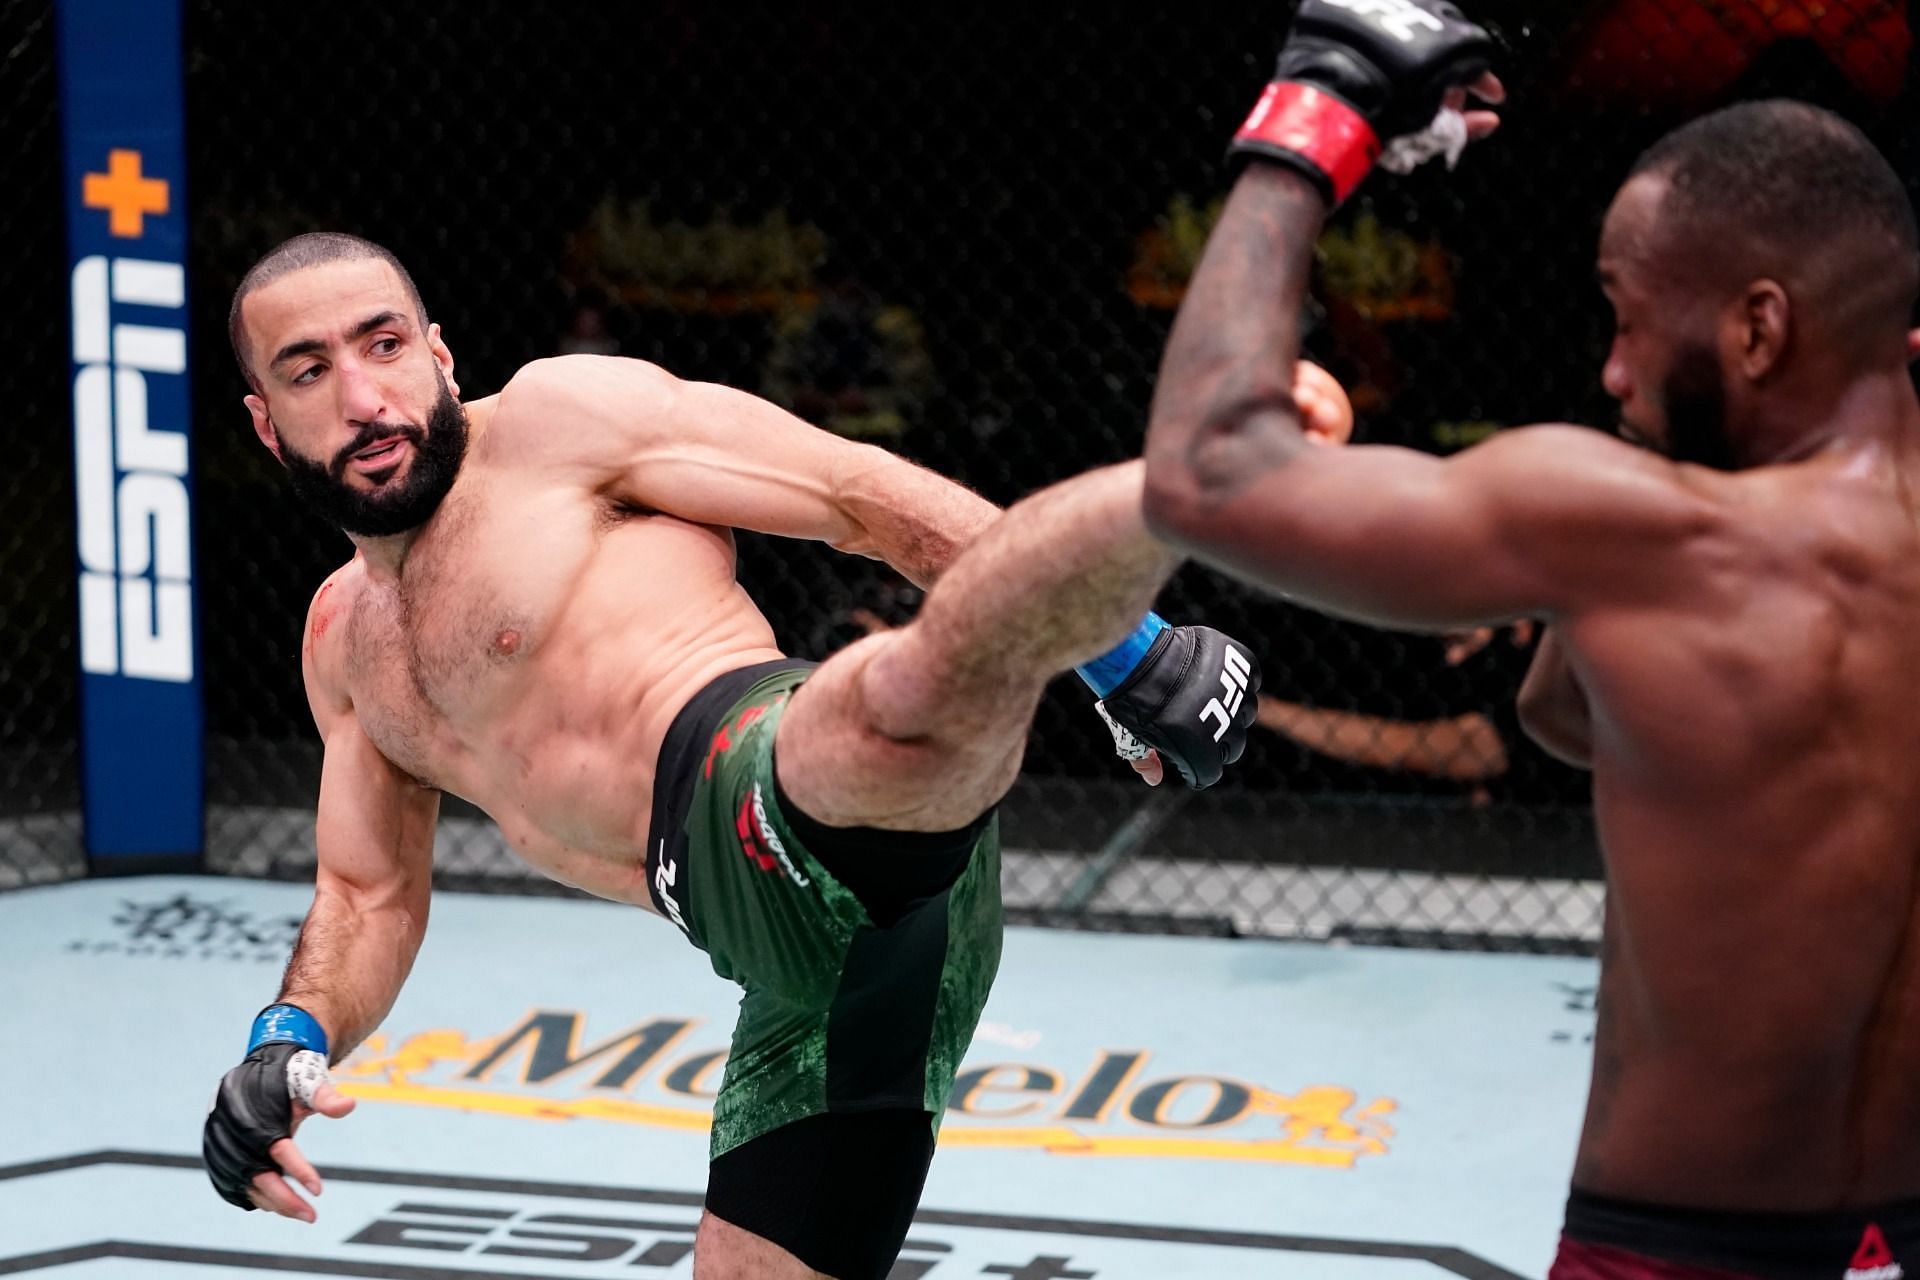 Belal Muhammad (left) in action against Leon Edwards (right) at UFC Fight Night 187 earlier this year